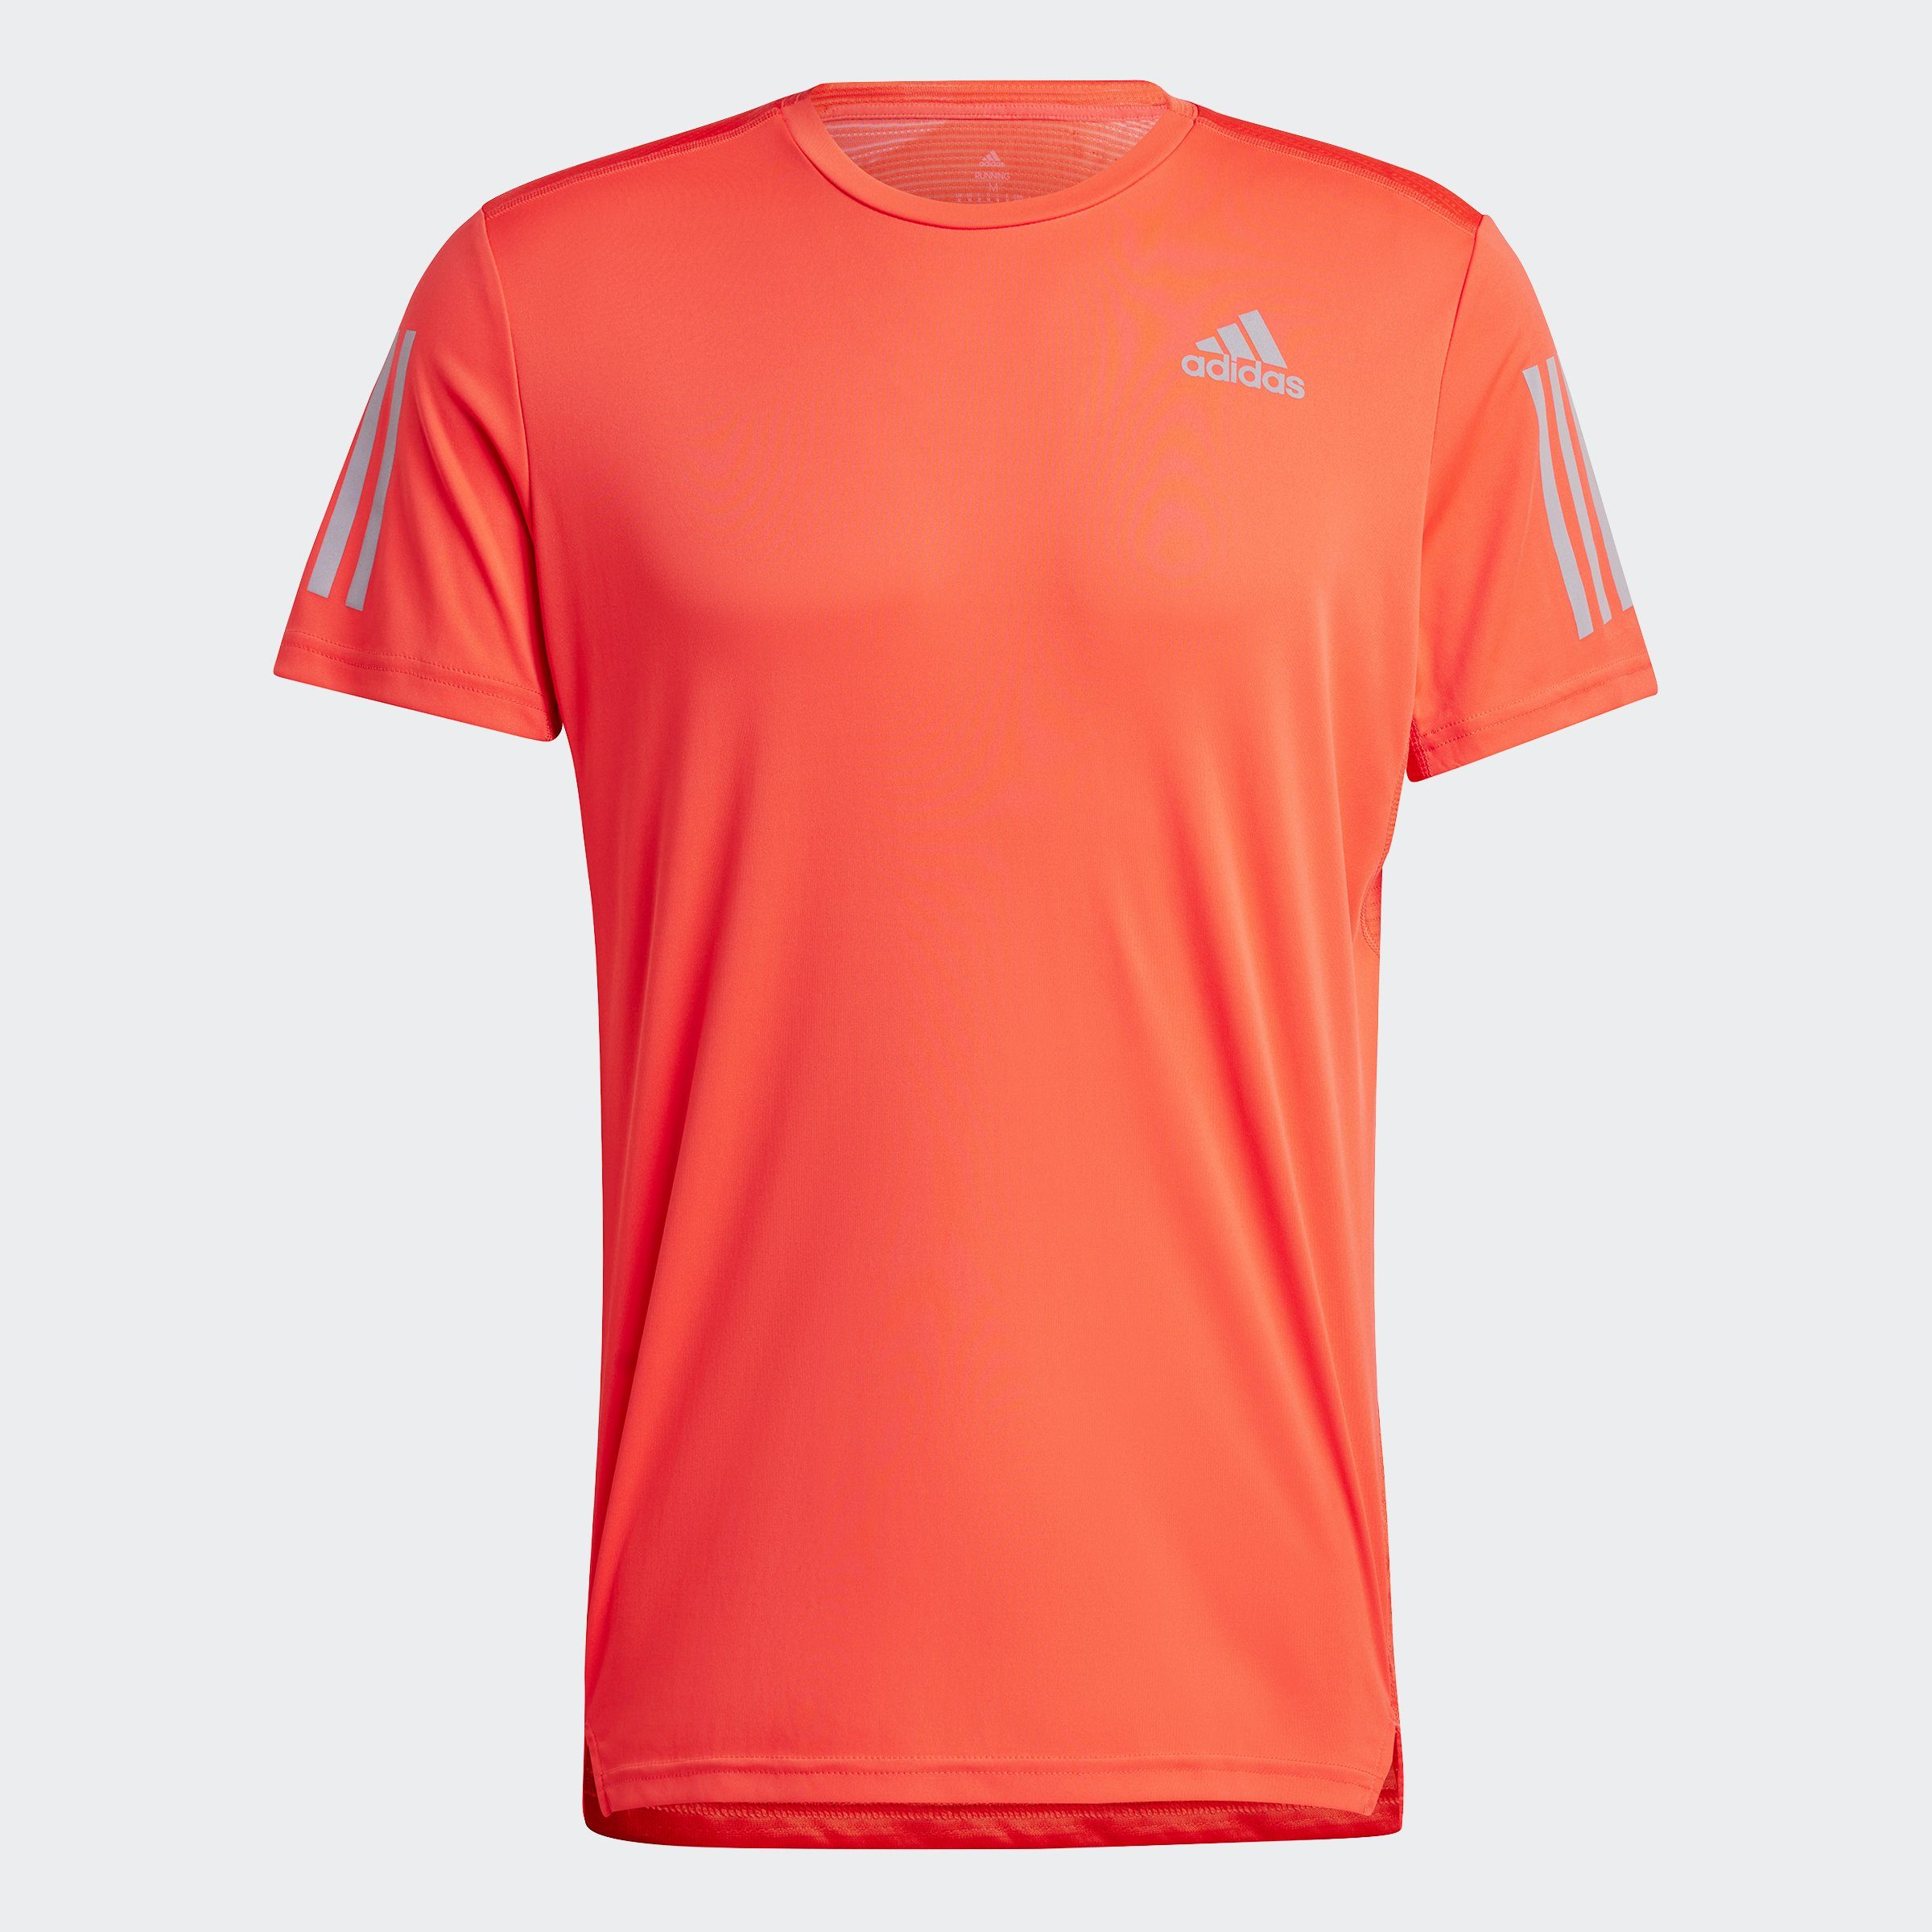 Laufshirt Reflective Performance adidas Bright Silver / THE Red OWN RUN